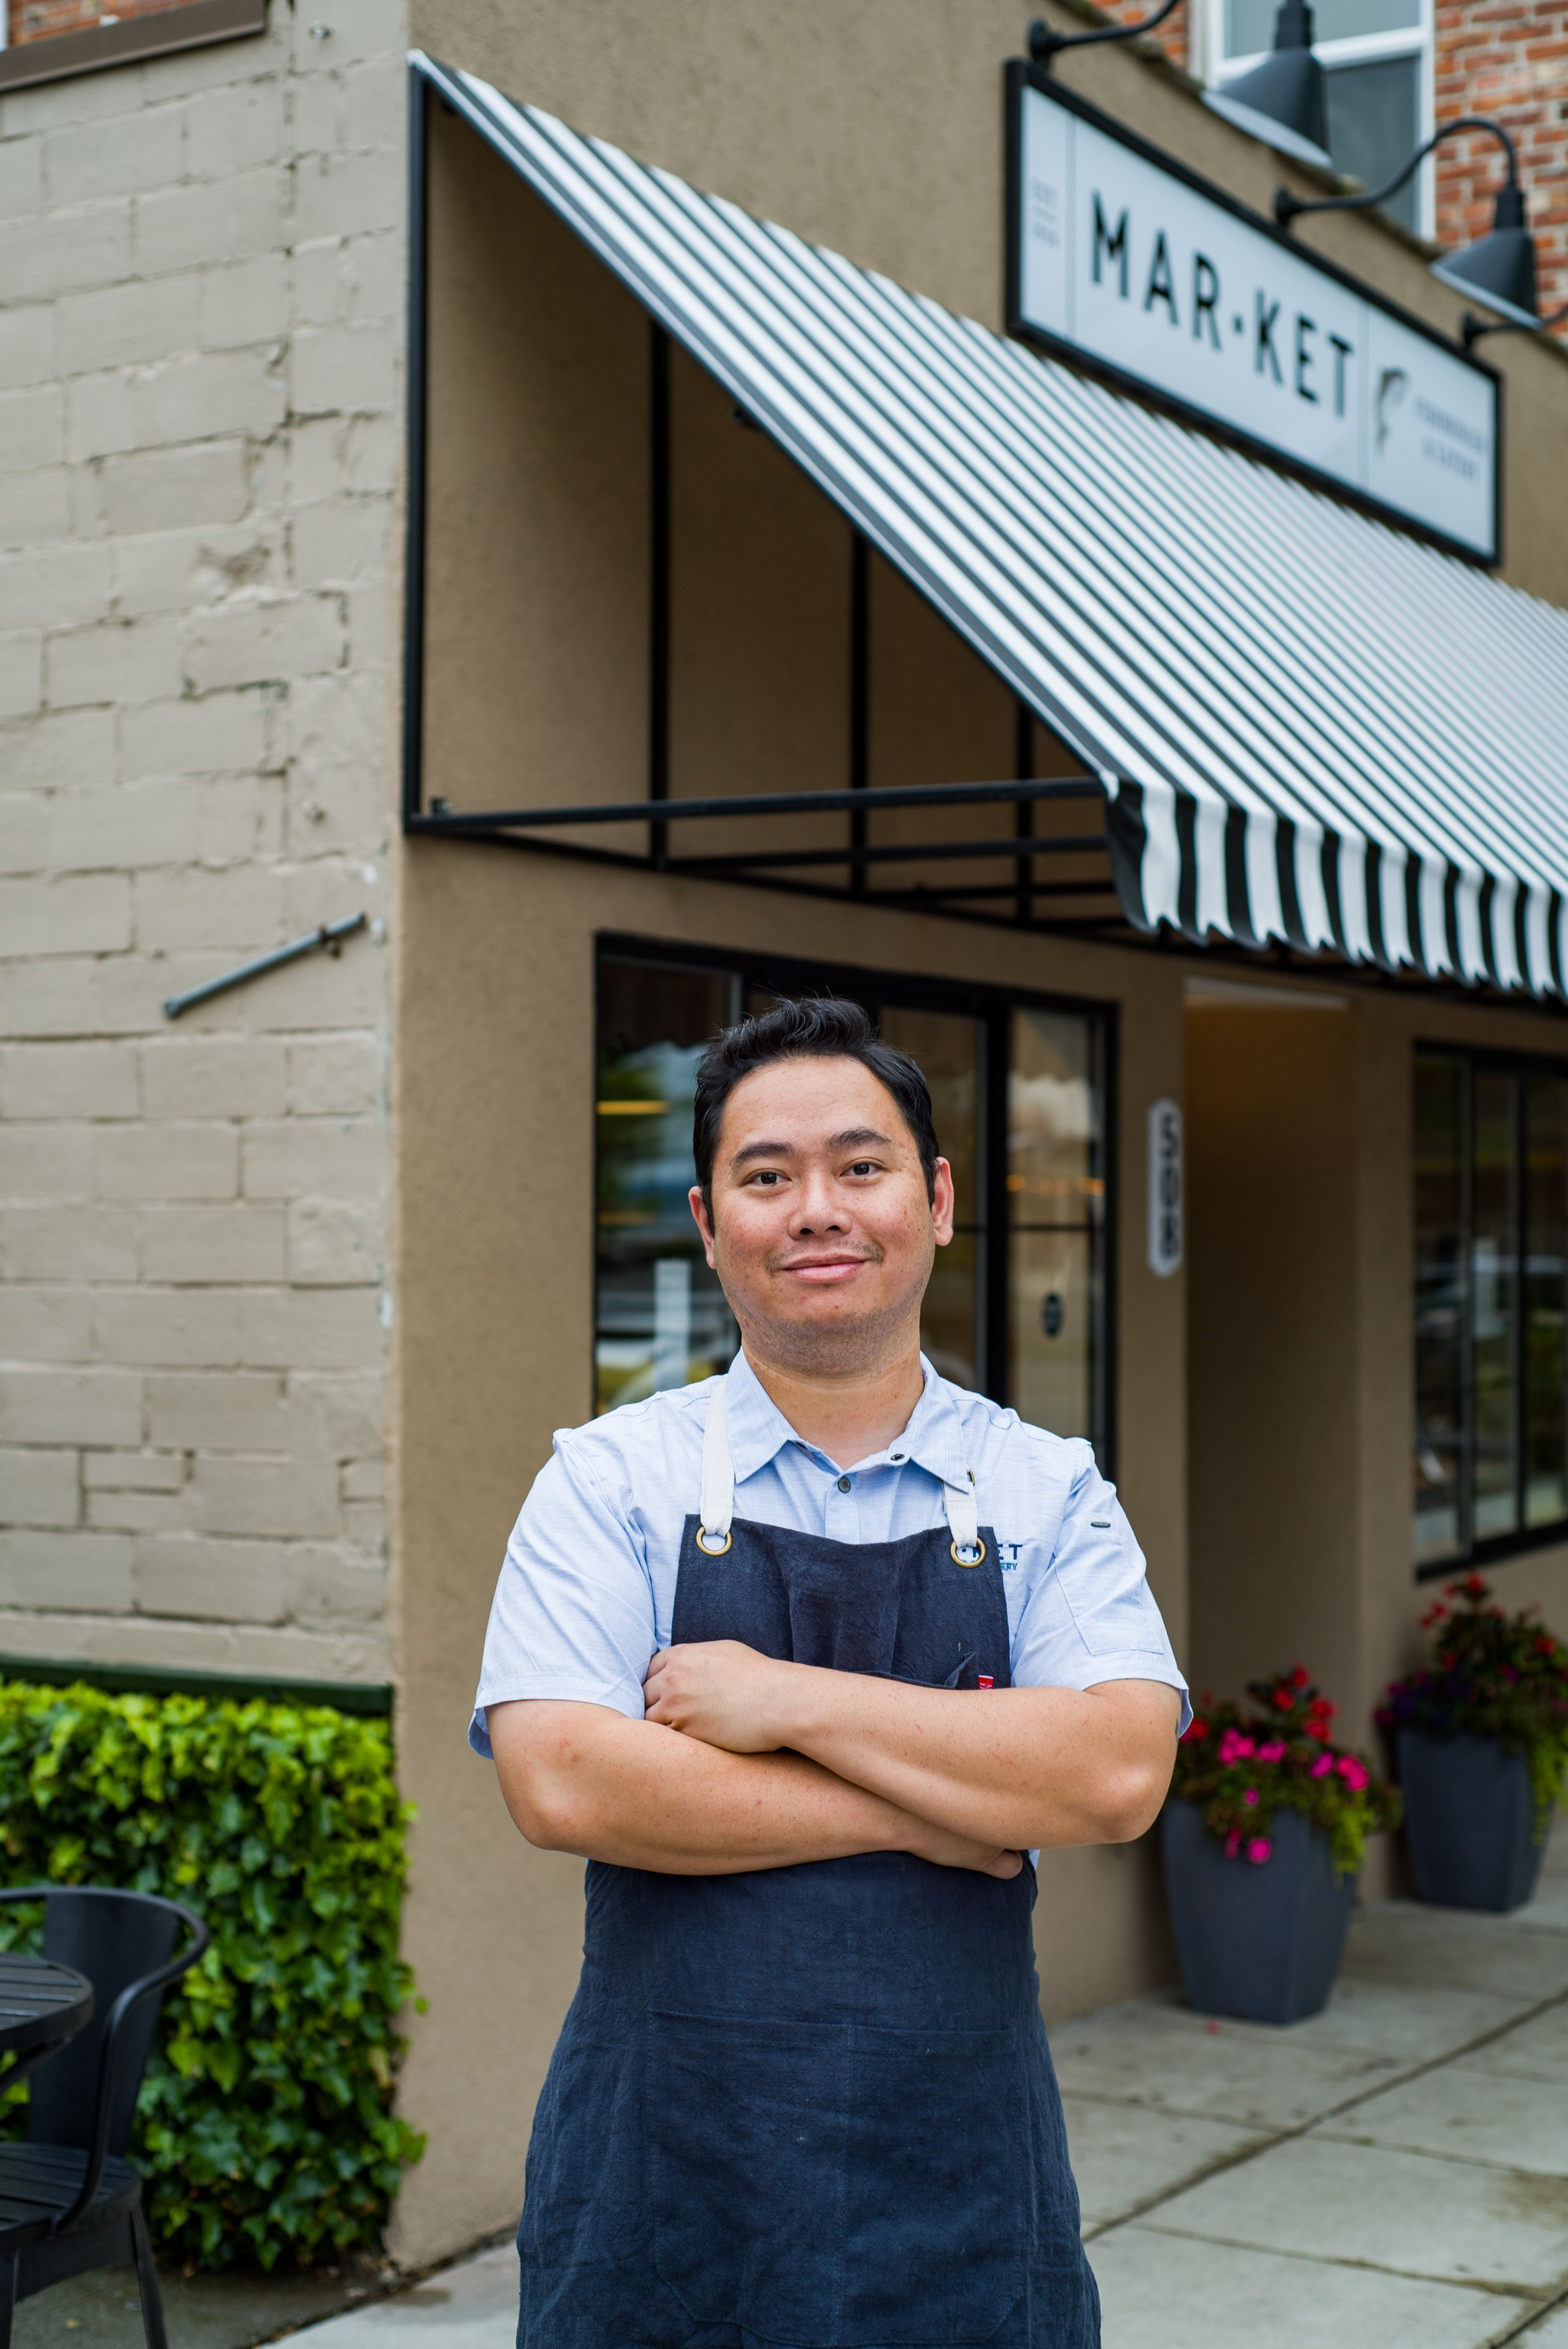 A man with medium-length black hair, wearing a black apron and a light blue button-down shirt, stands outside of a restaurant.